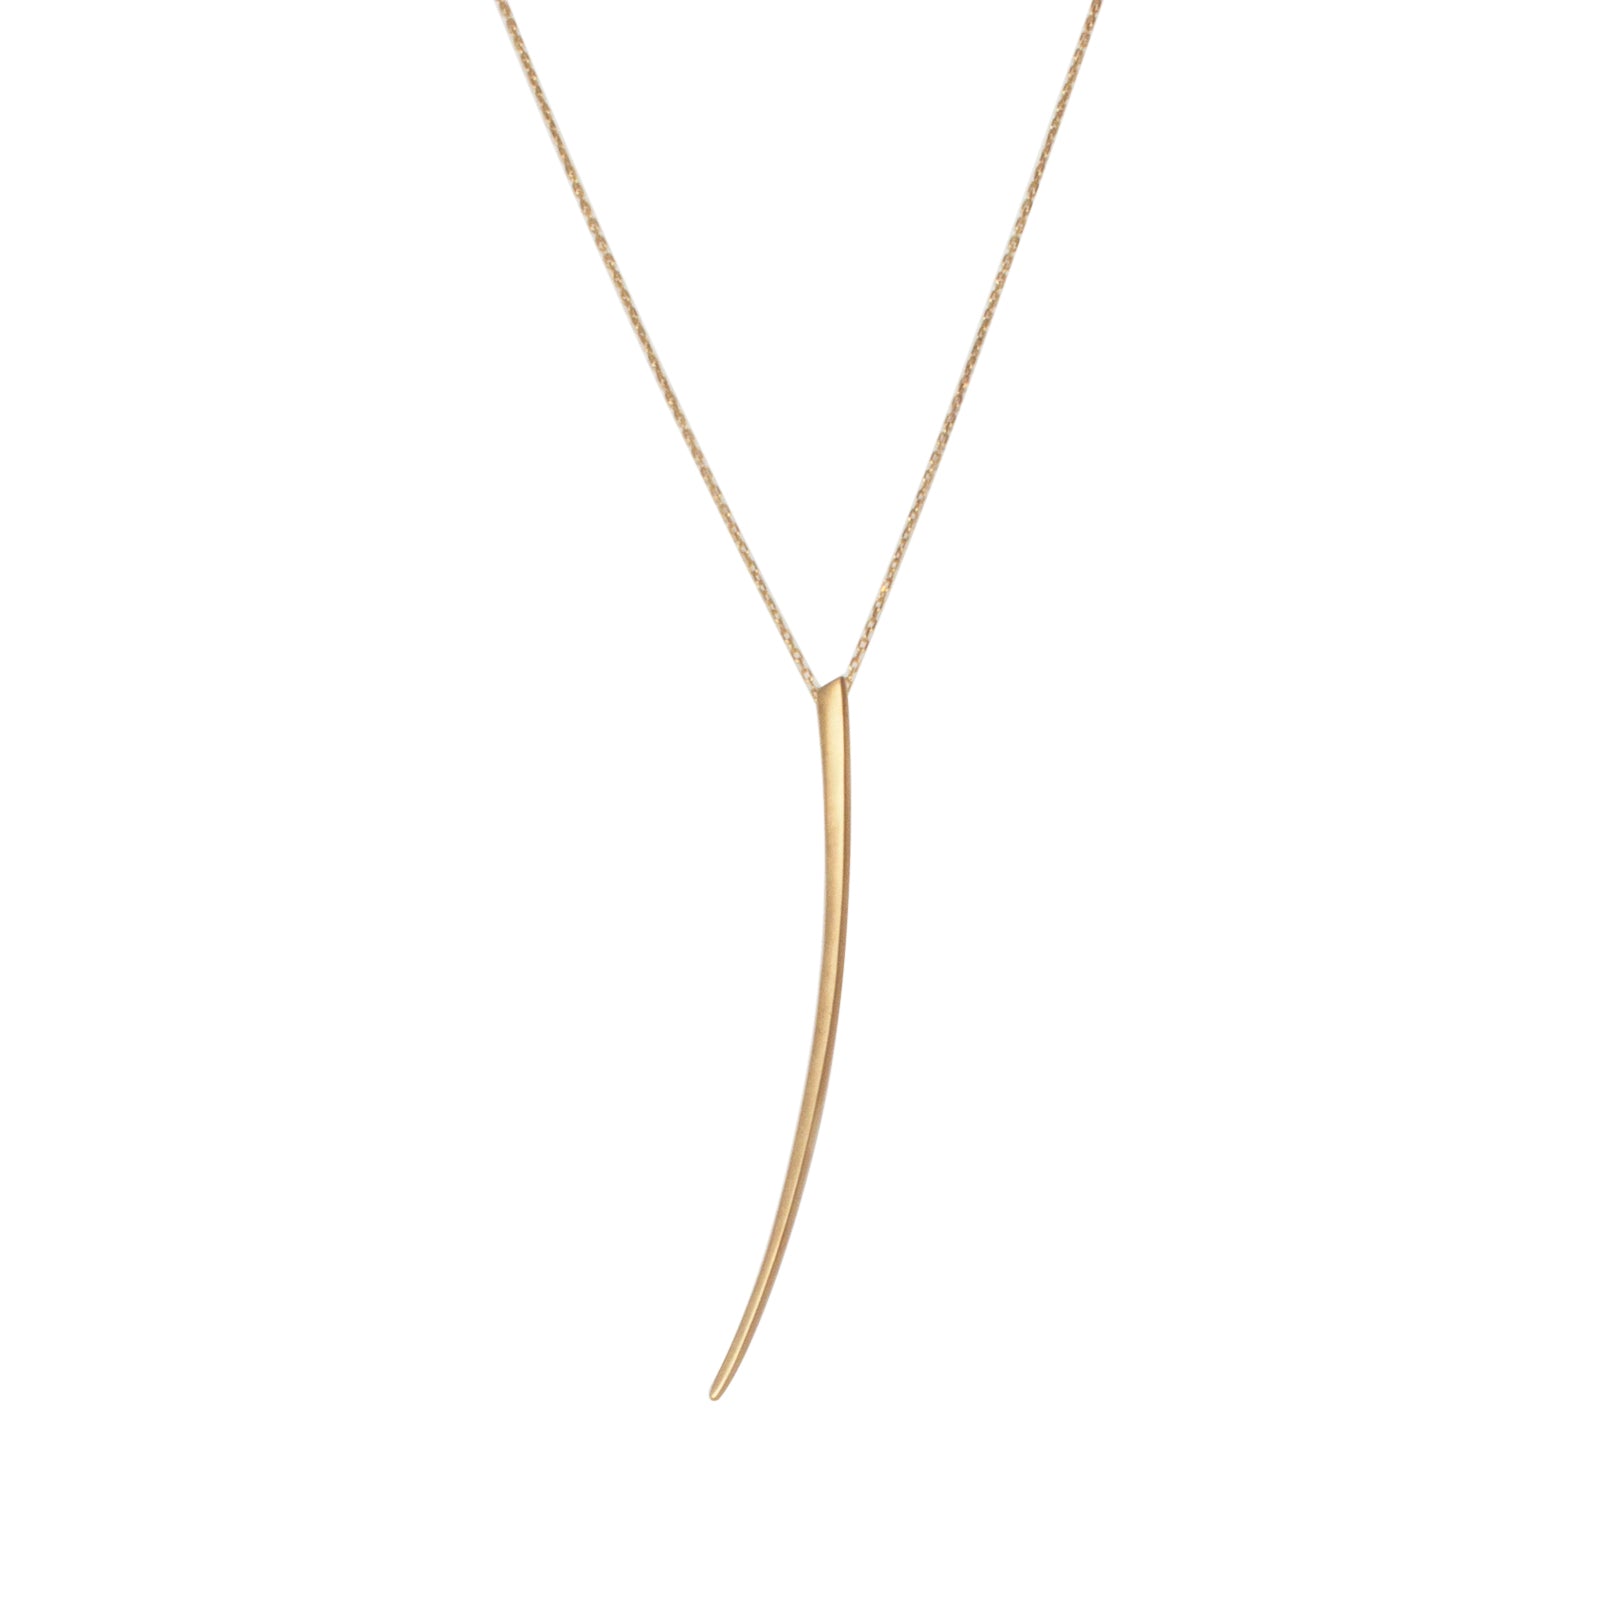 14k yellow gold pendant on a 14k yellow gold chain curved stake pendant